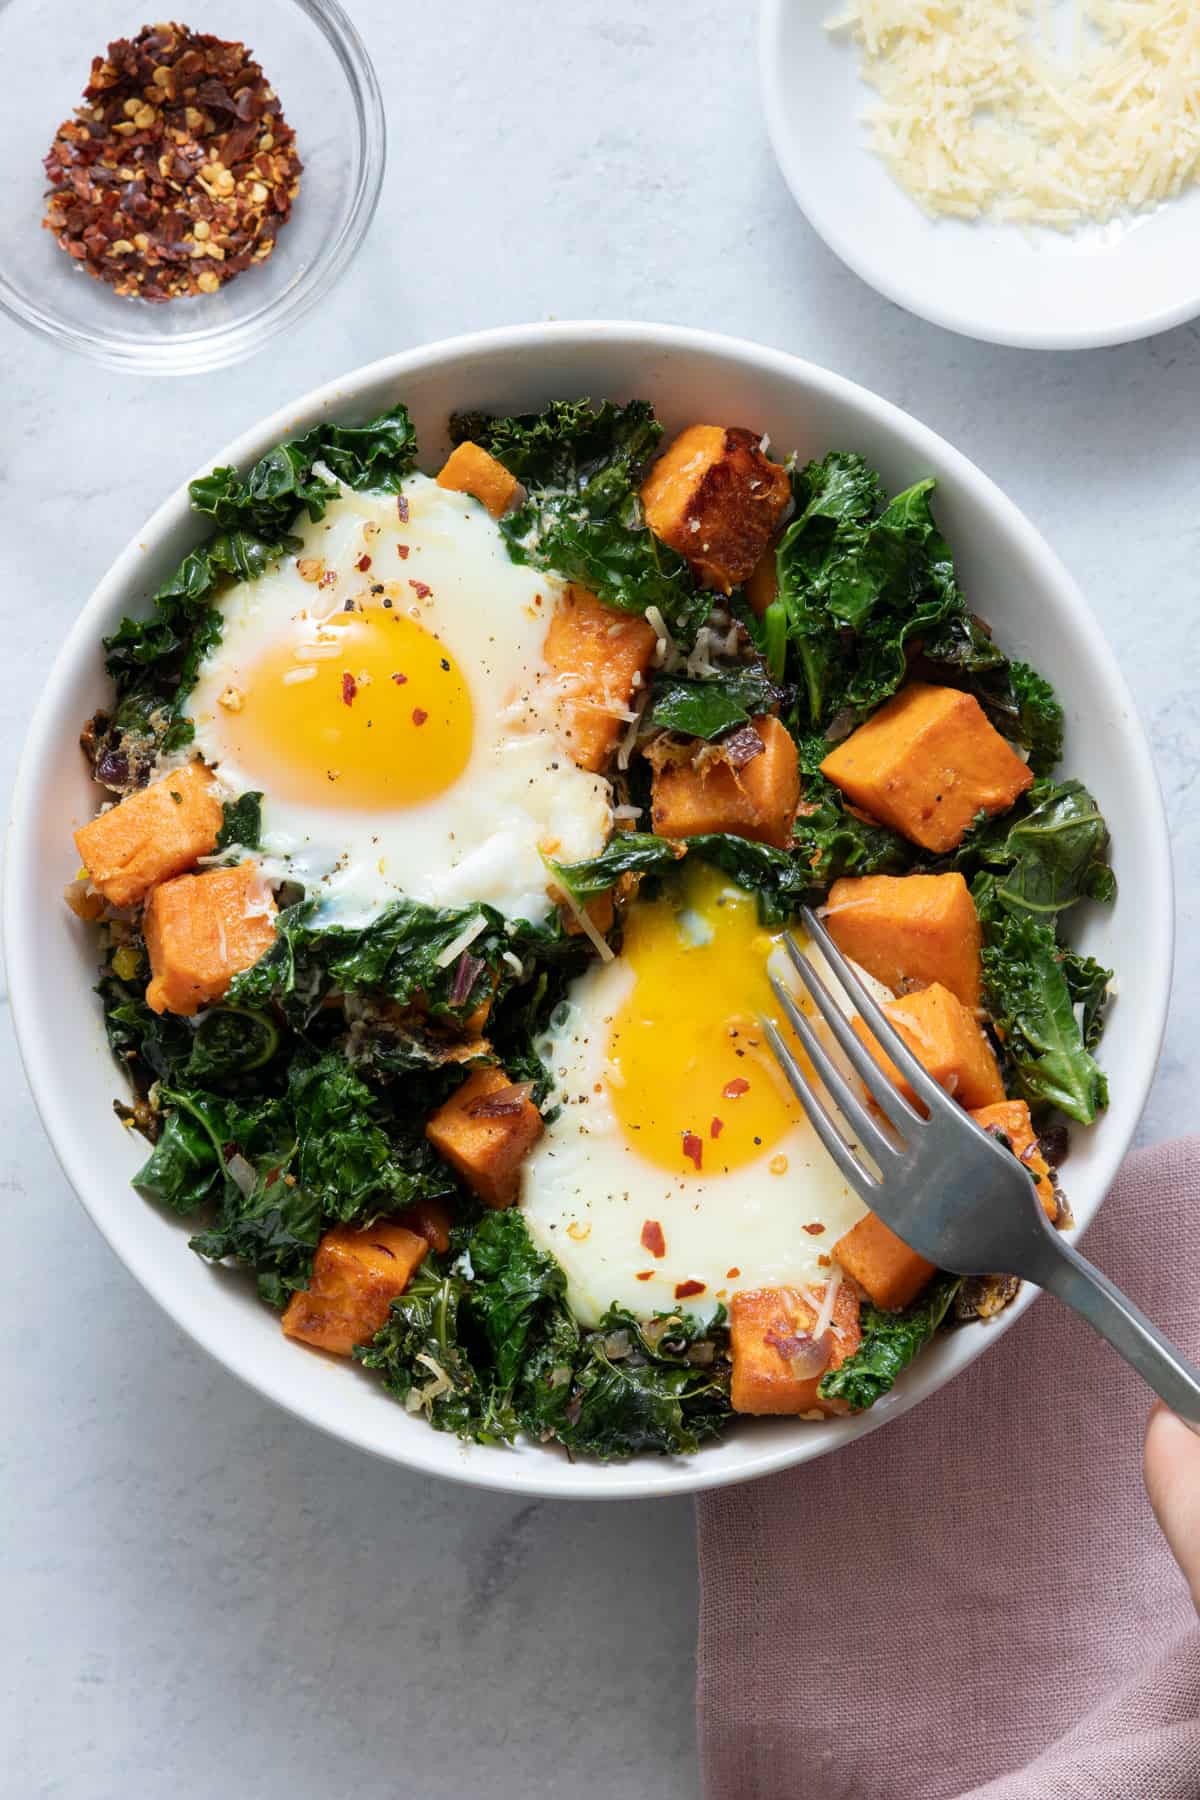 Bowl of the kale, sweet potatoes and 2 eggs and fork inside bowl, cutting into egg garnished with red pepper flakes.